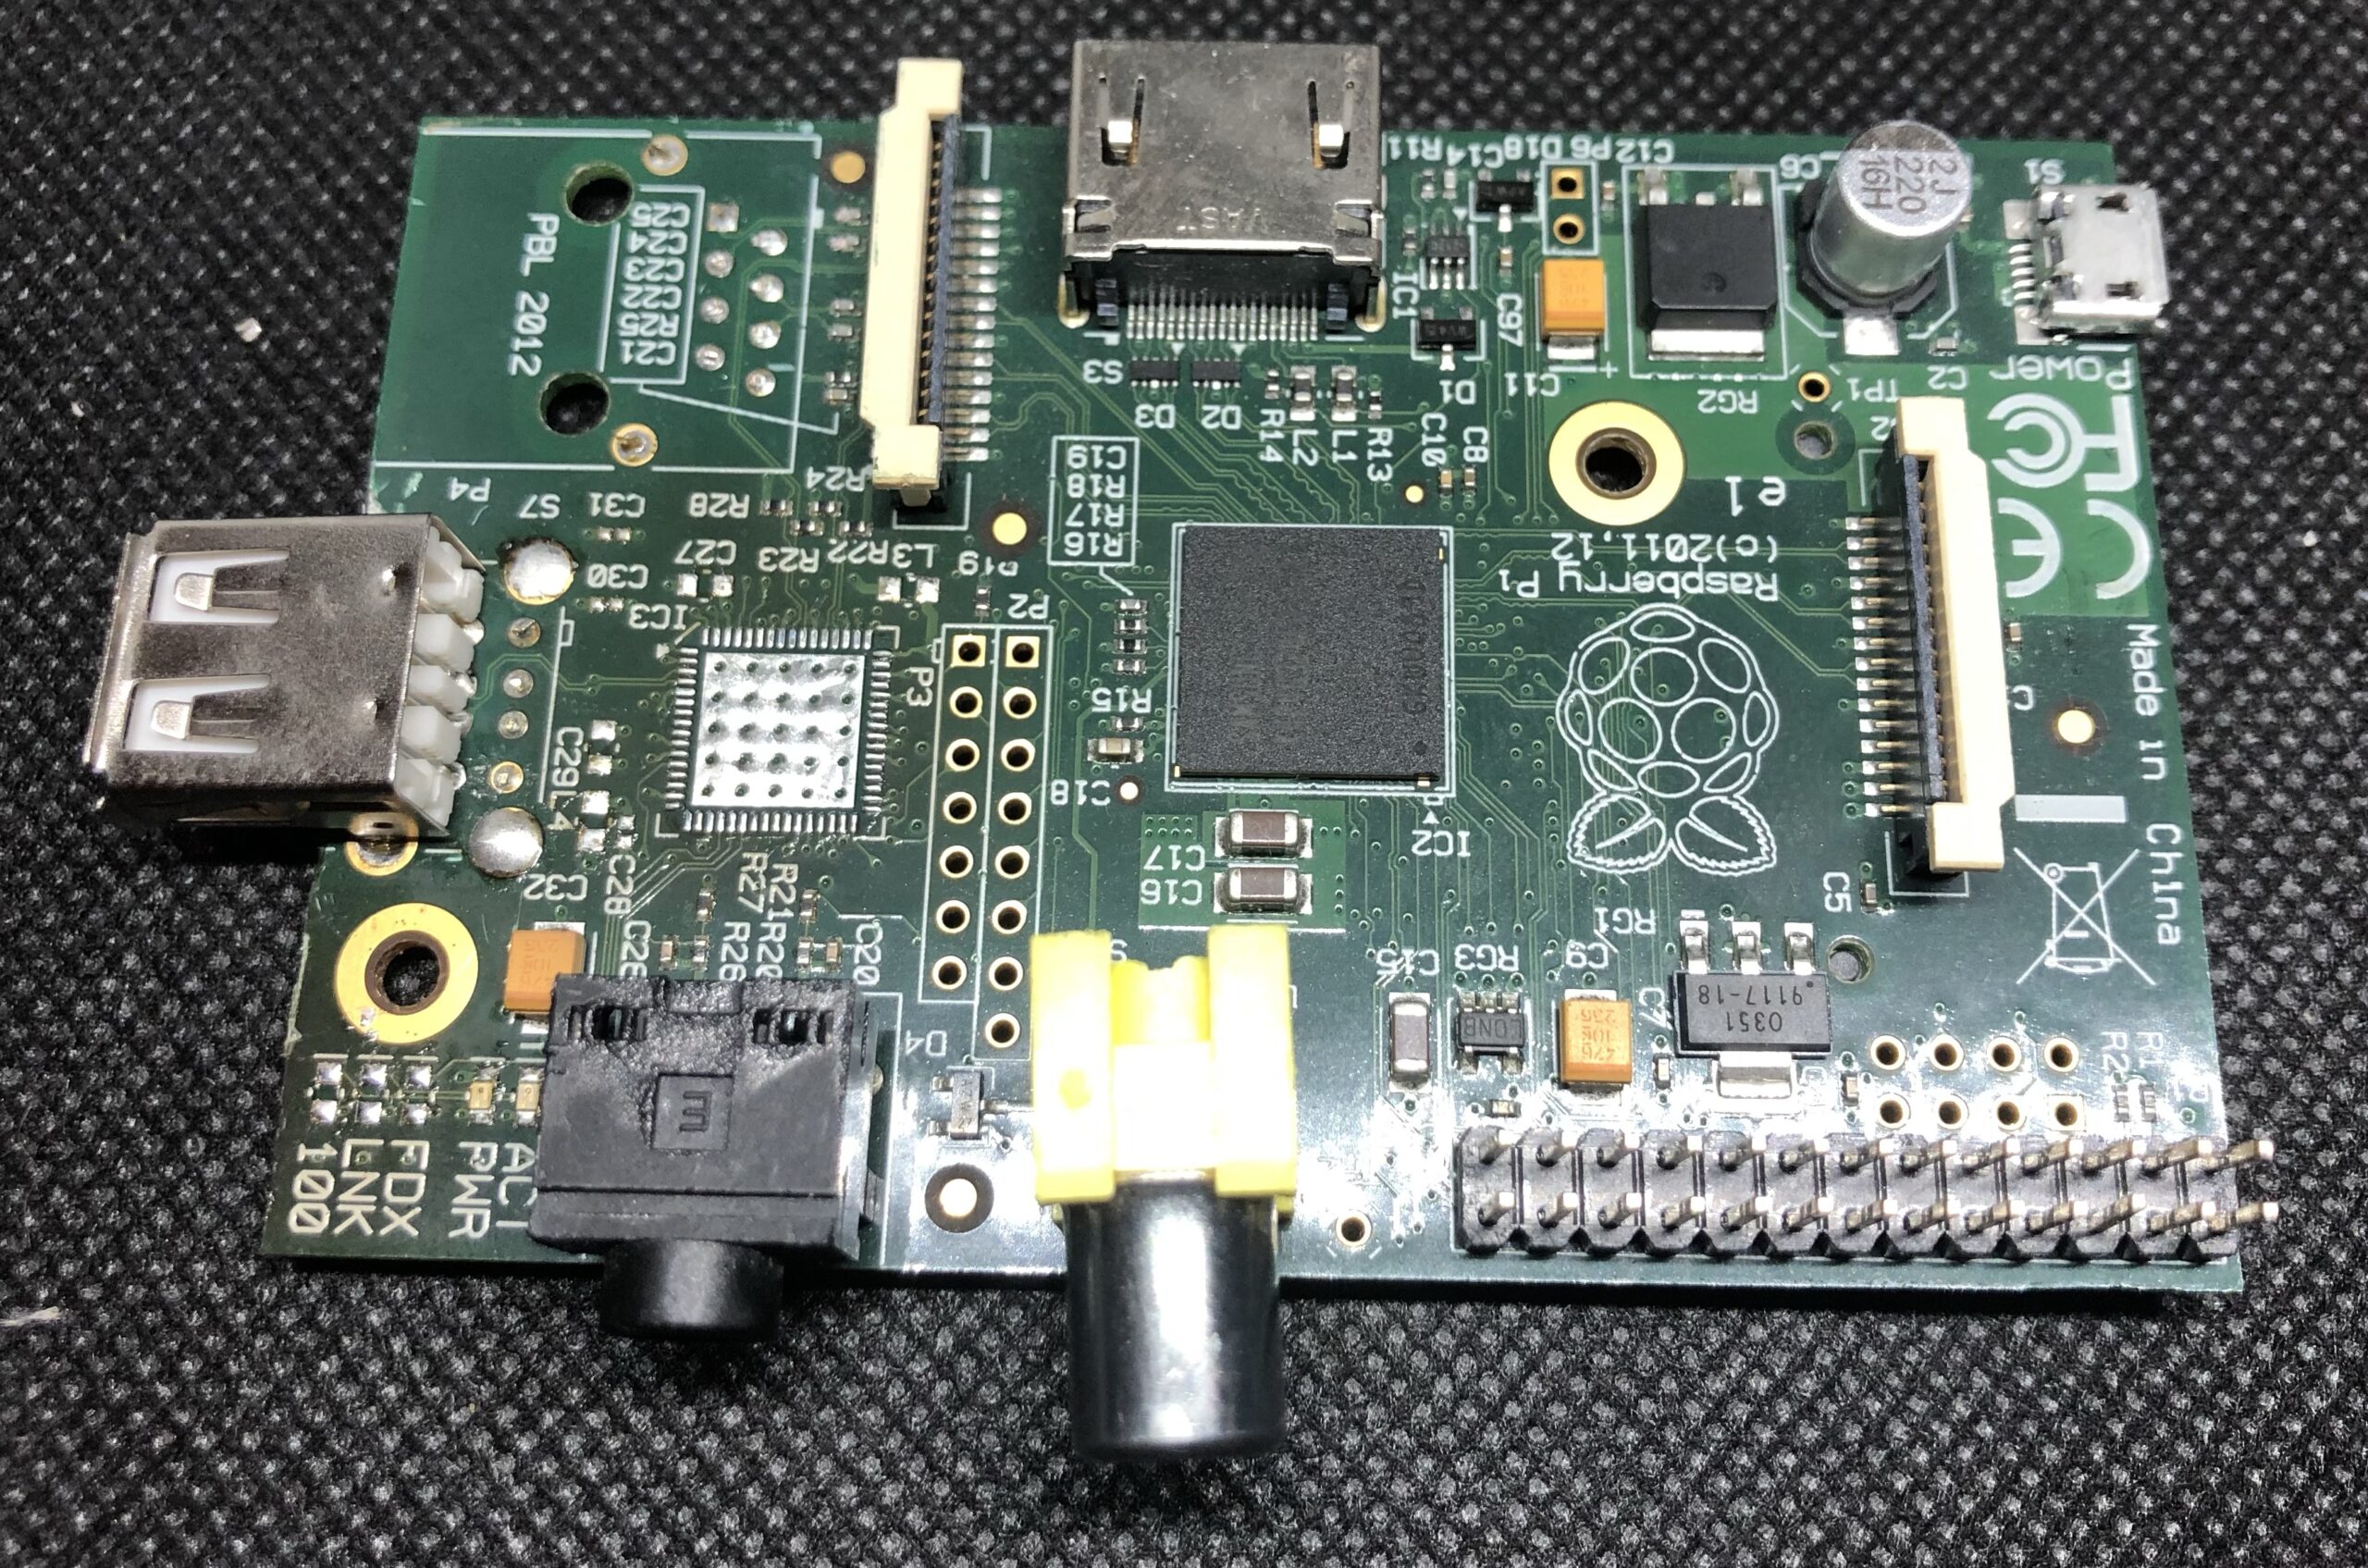 I bought 200 Raspberry Pi Model B’s and I’m going to fix them Part 5